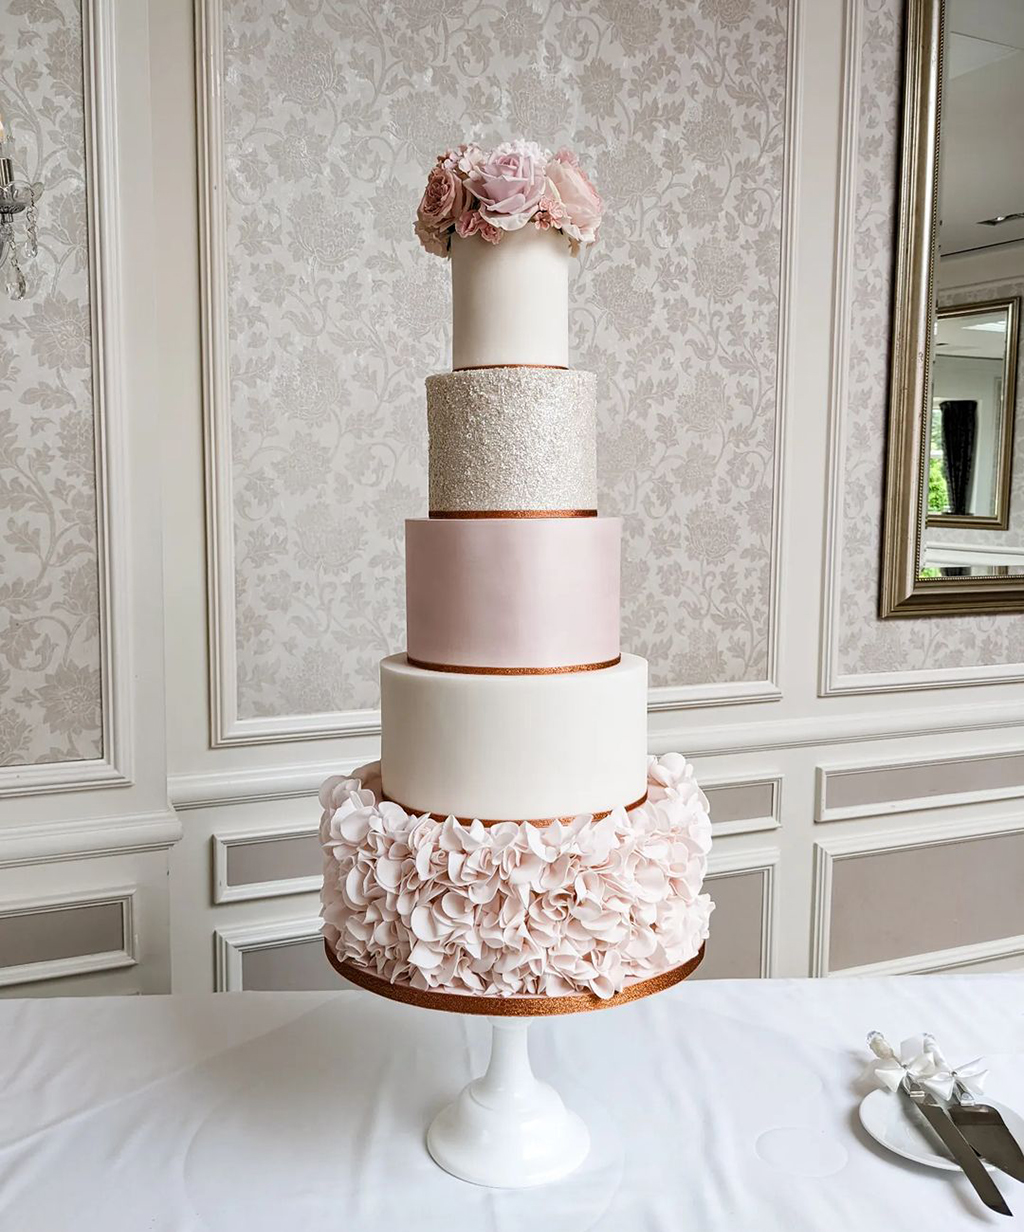 48 of the Prettiest Vintage-Style Wedding Cakes